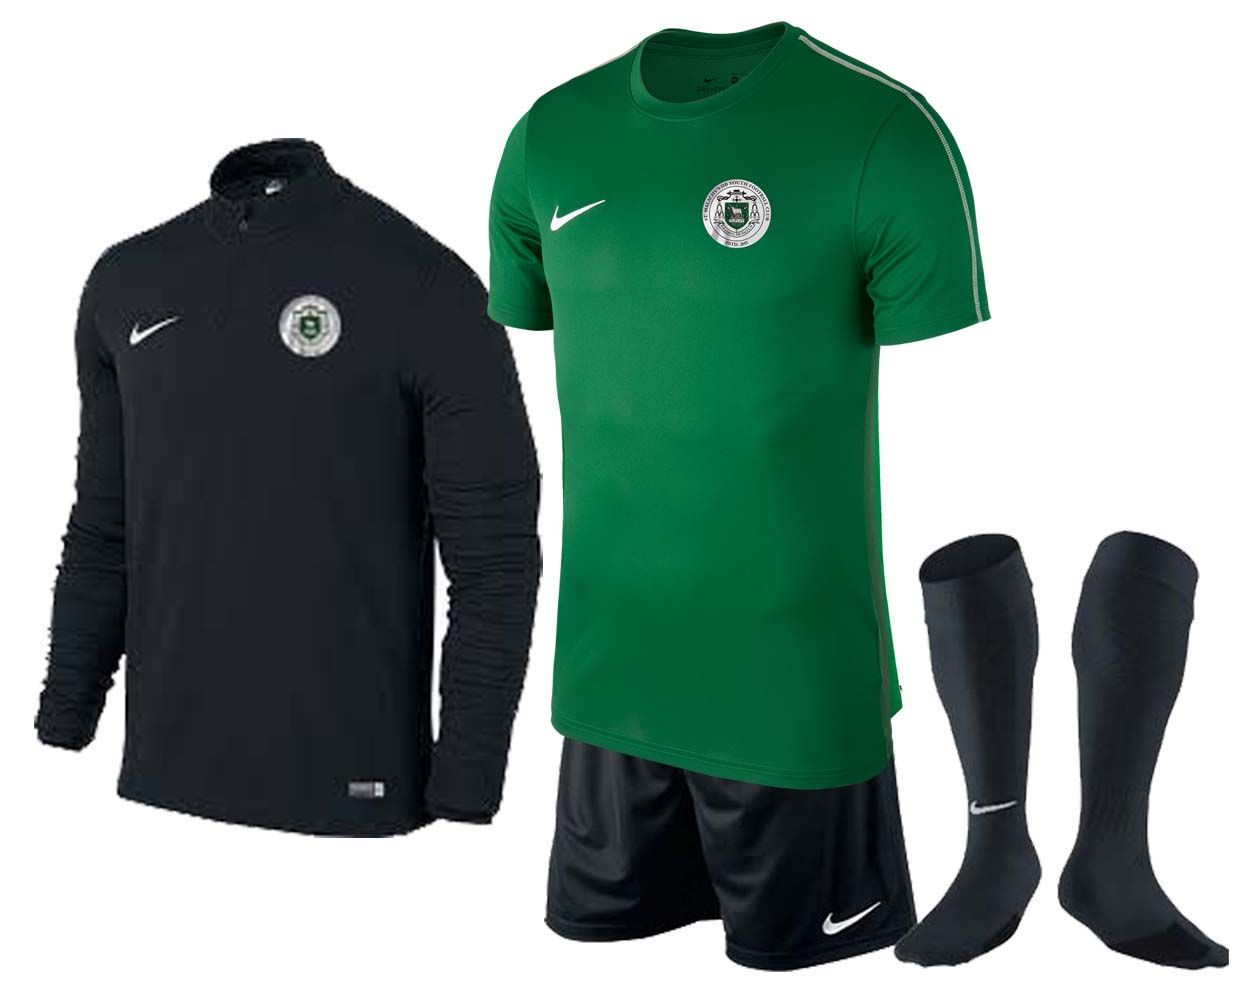 st malachy s ob player pack 2 26079 1 p